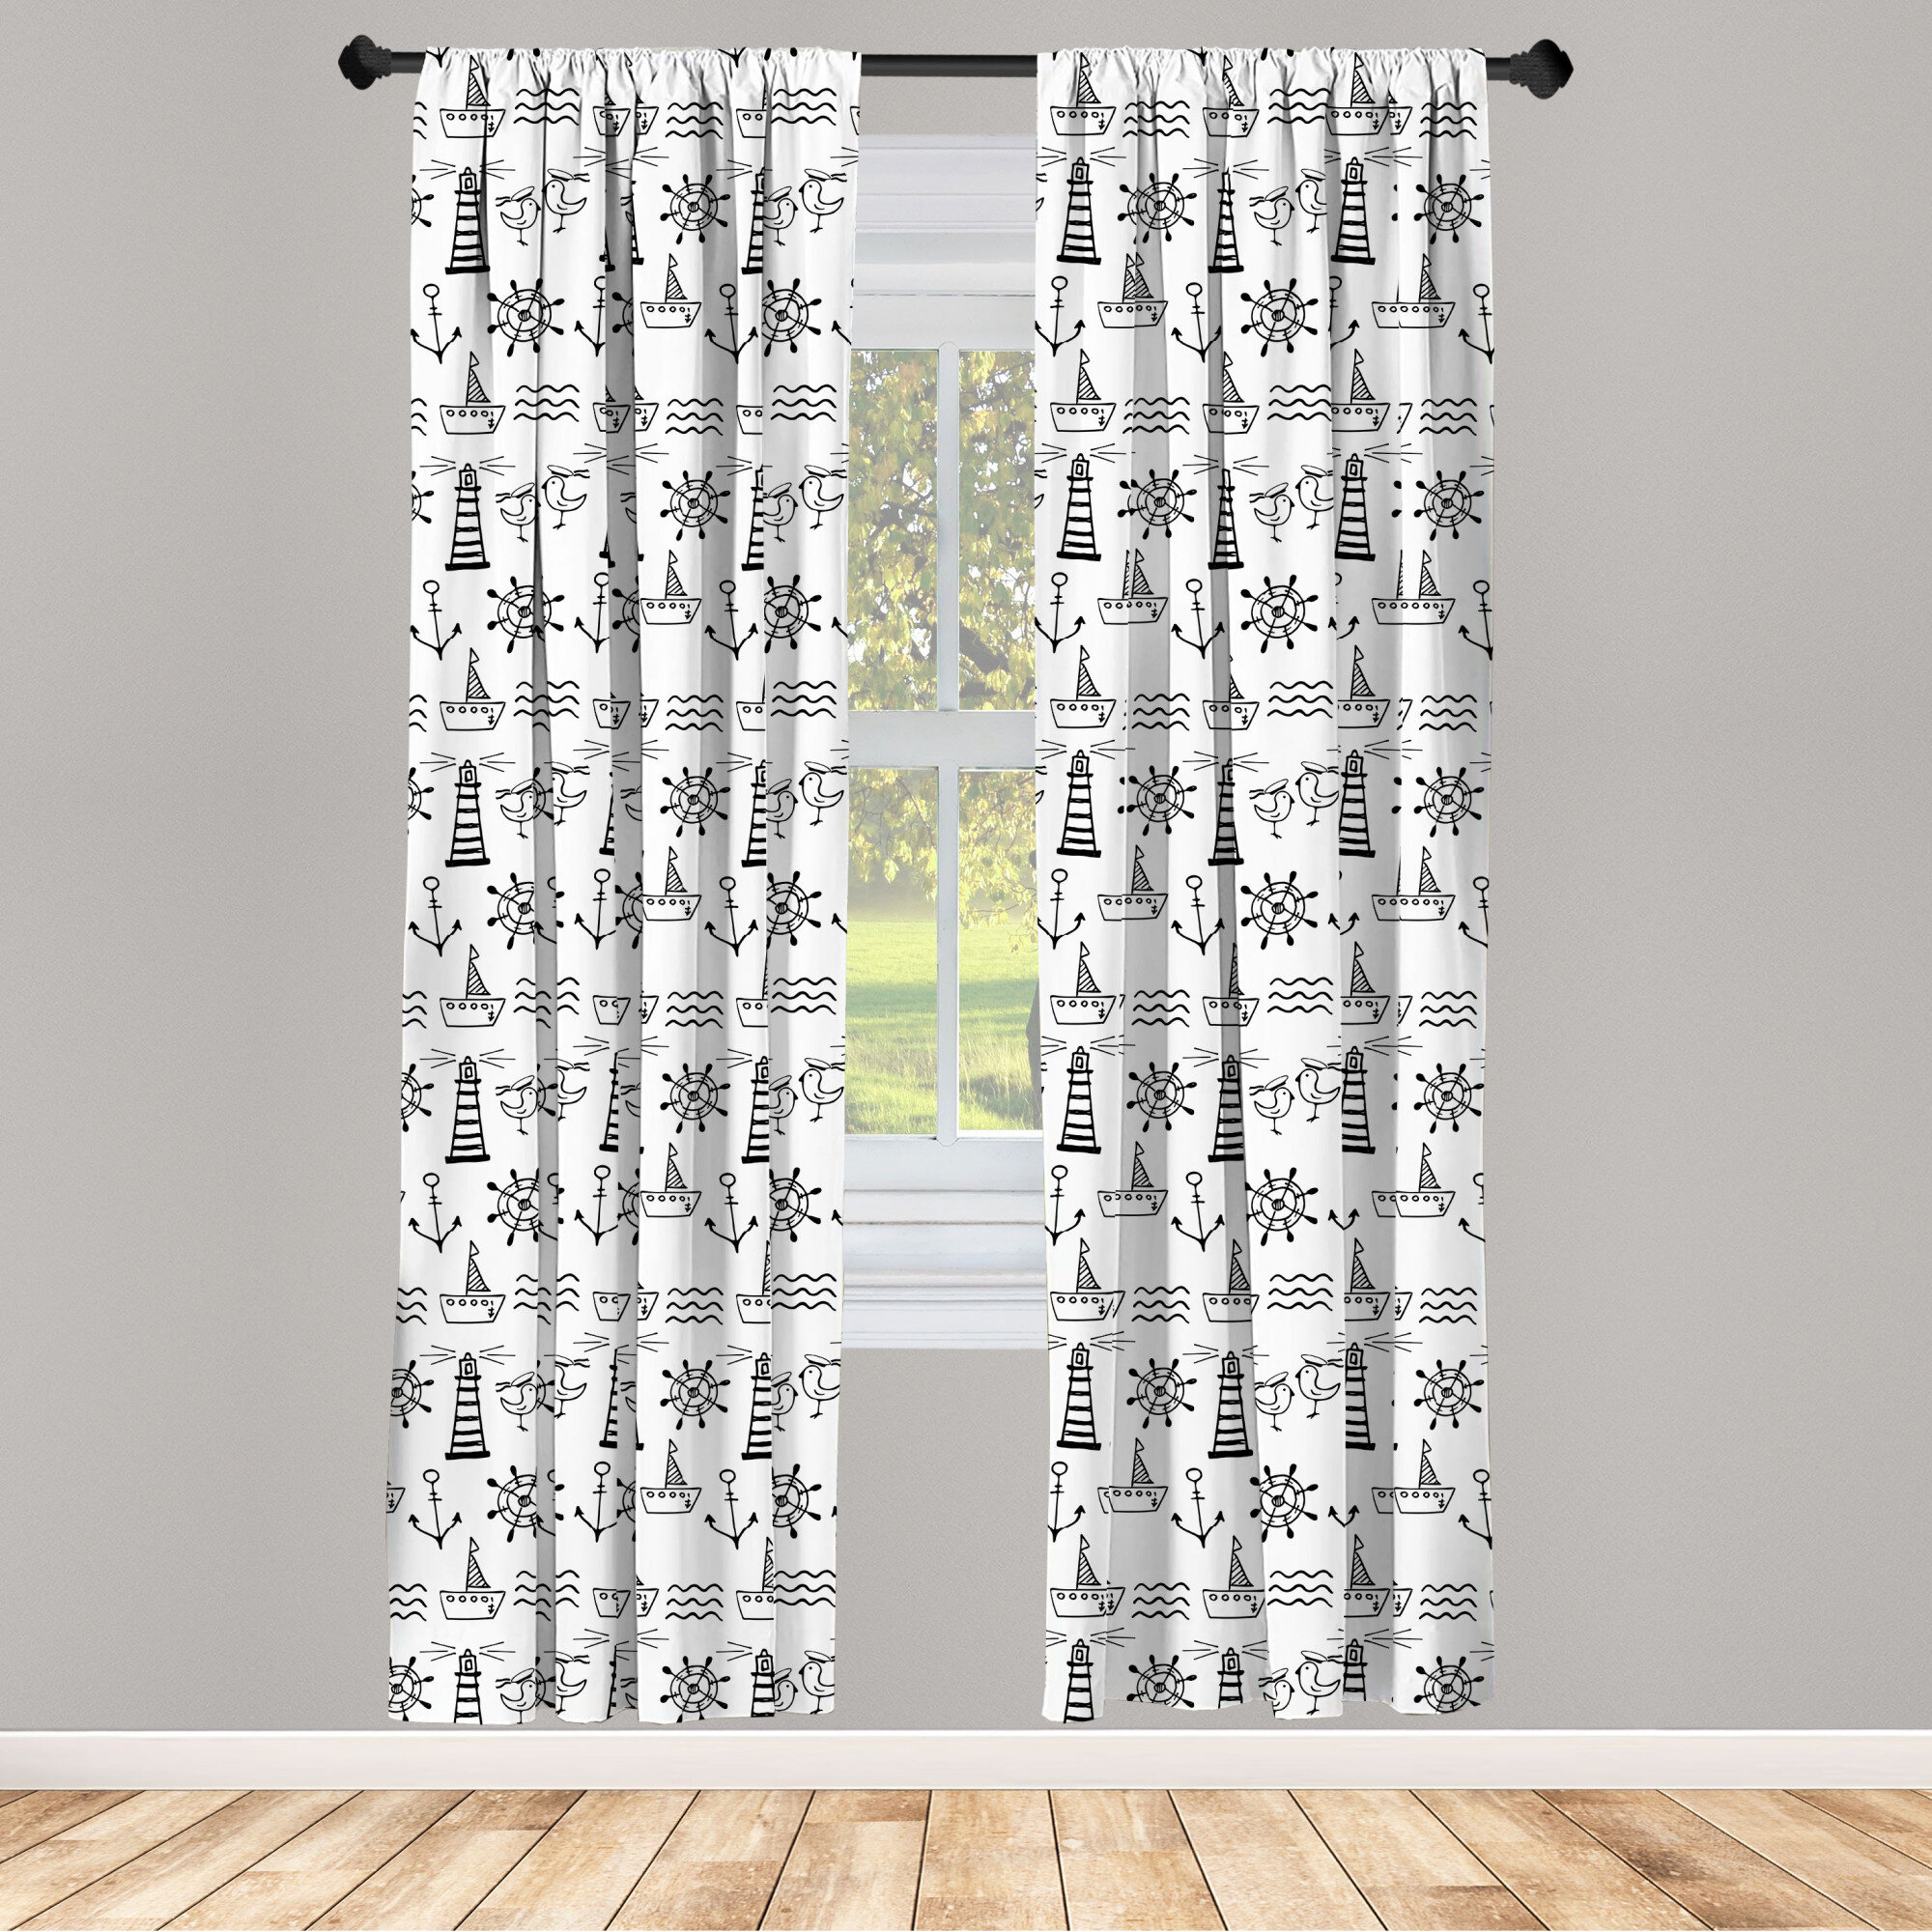 Wave Microfiber Curtains 2 Panel Set for Living Room Bedroom in 3 Sizes 